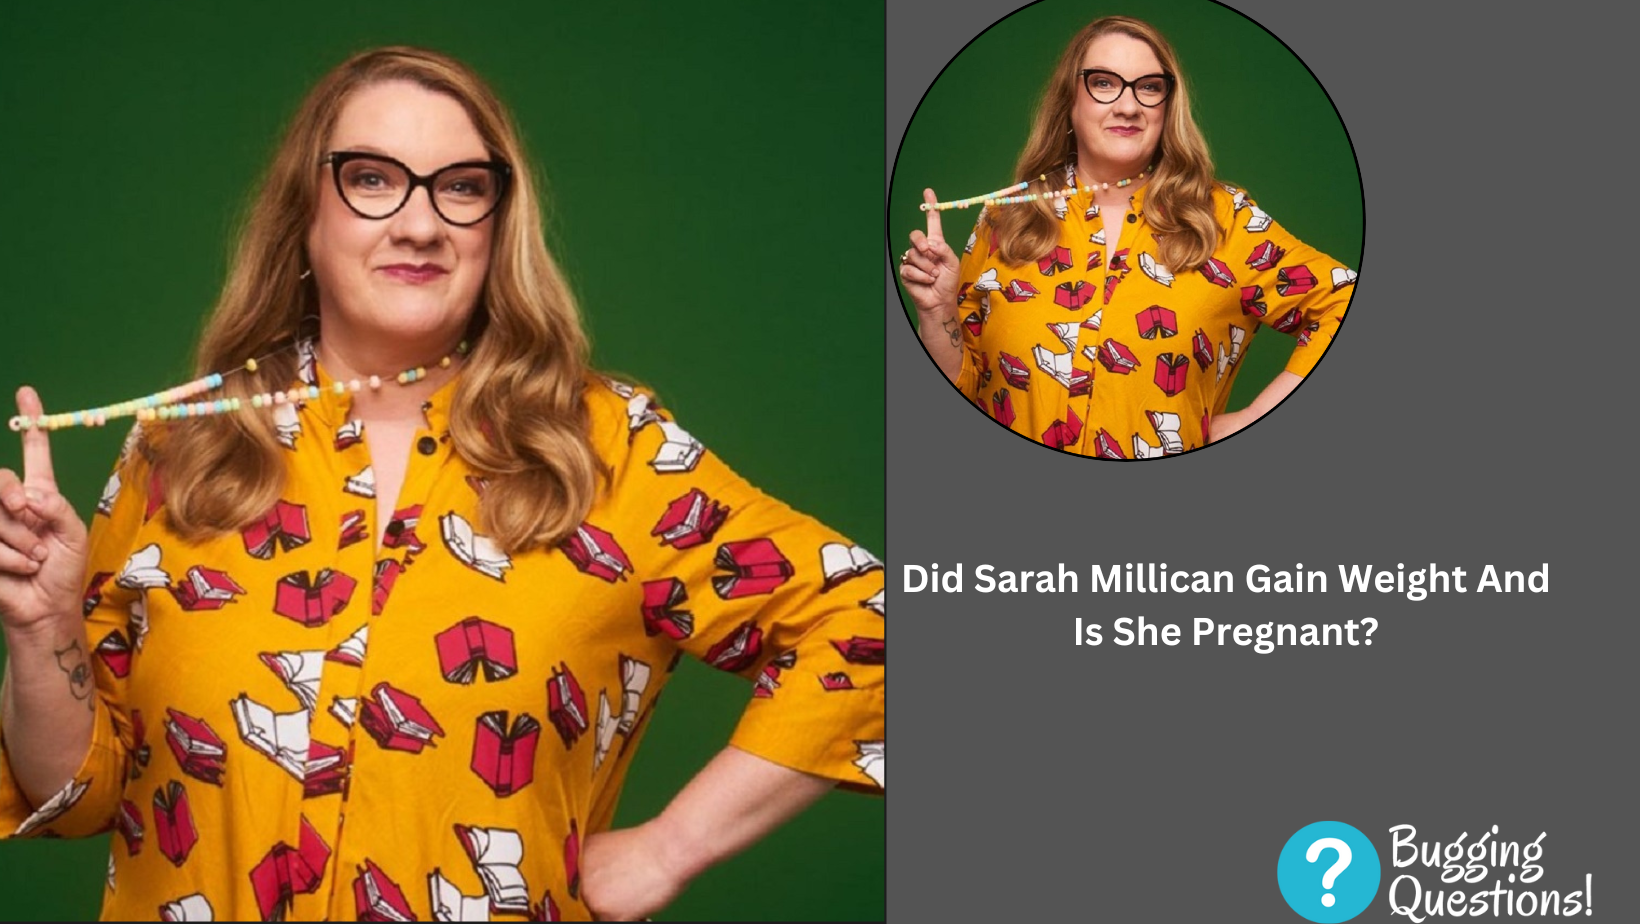 Did Sarah Millican Gain Weight And Is She Pregnant?